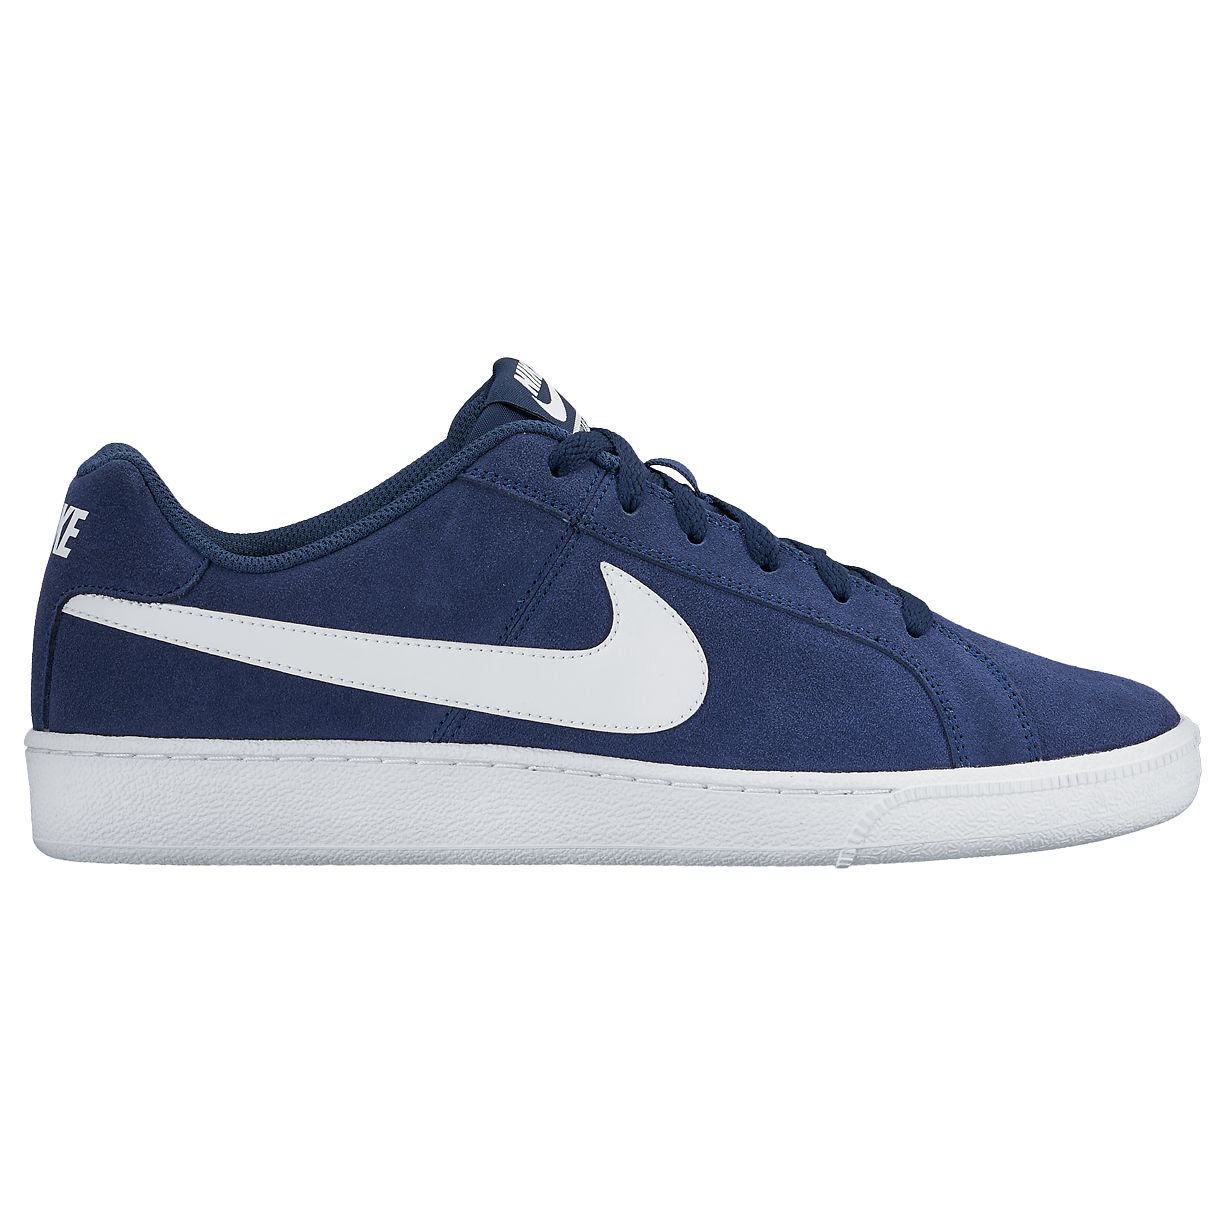 Nike Court Royale Suede Men #39 s Trainer Navy/White at John Lewis Partners